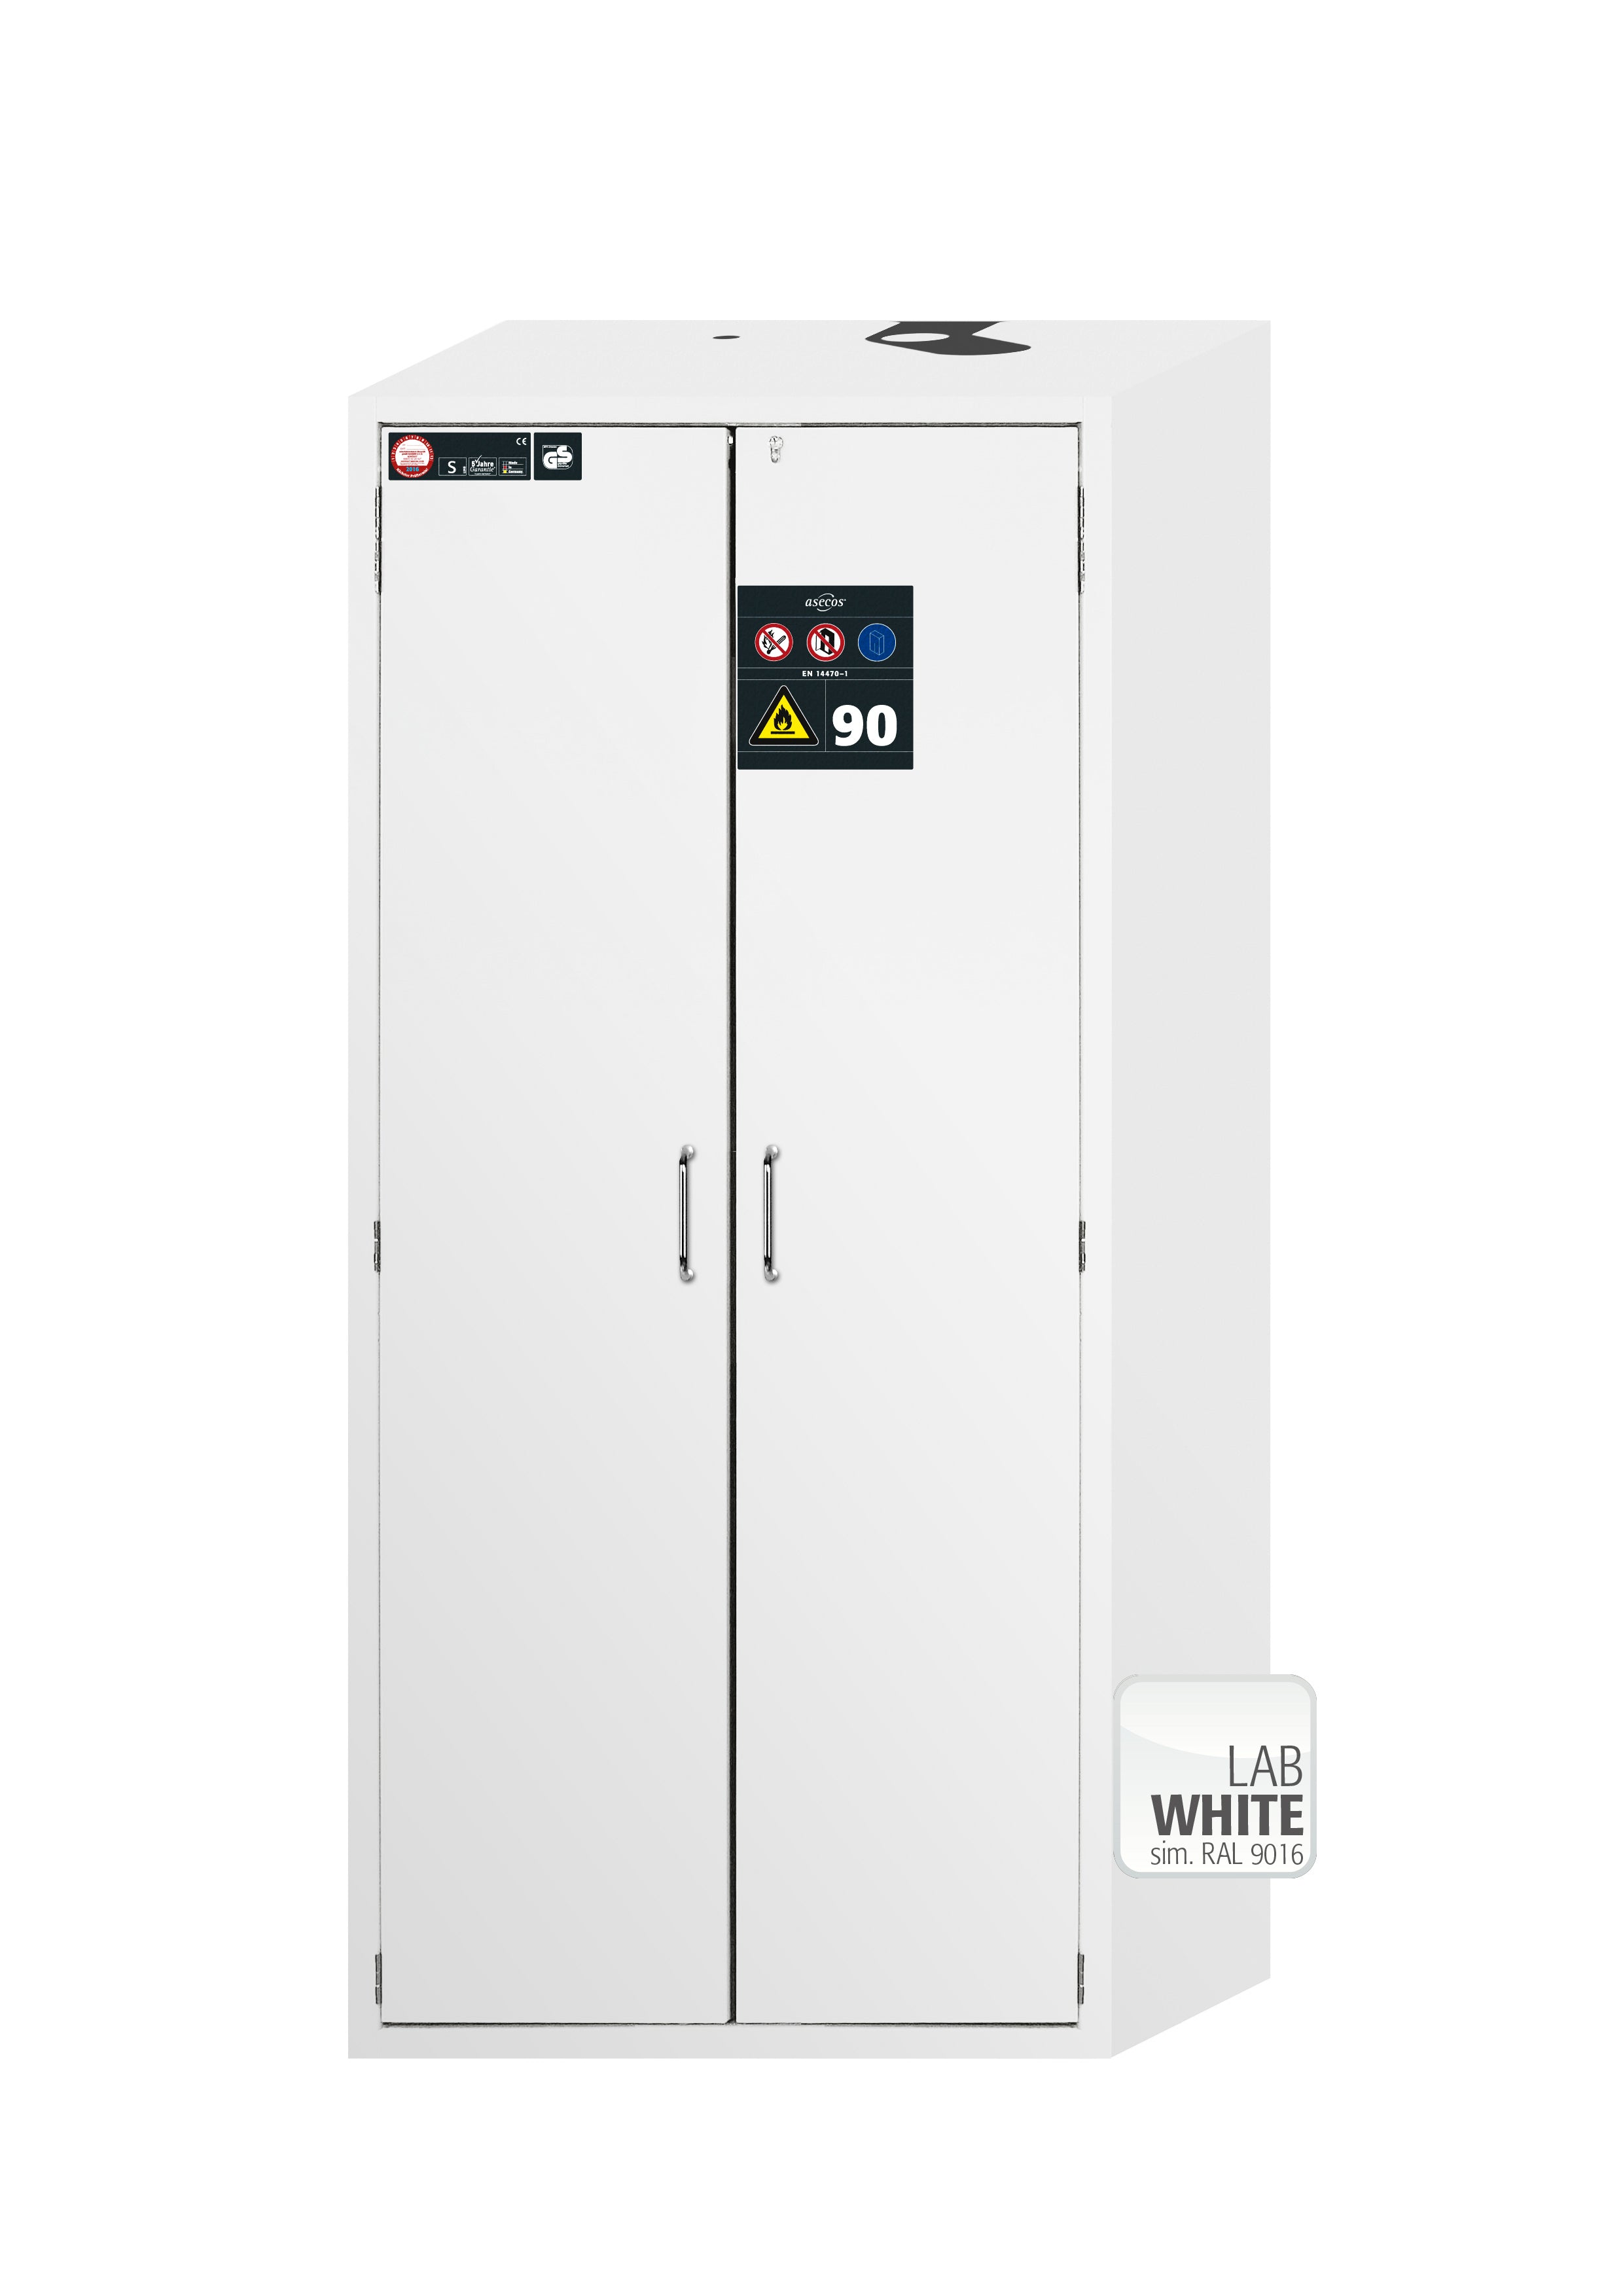 Type 90 safety cabinet S-CLASSIC-90 model S90.196.090.WDAS in laboratory white (similar to RAL 9016) with 4x standard pull-out tray (stainless steel 1.4301)